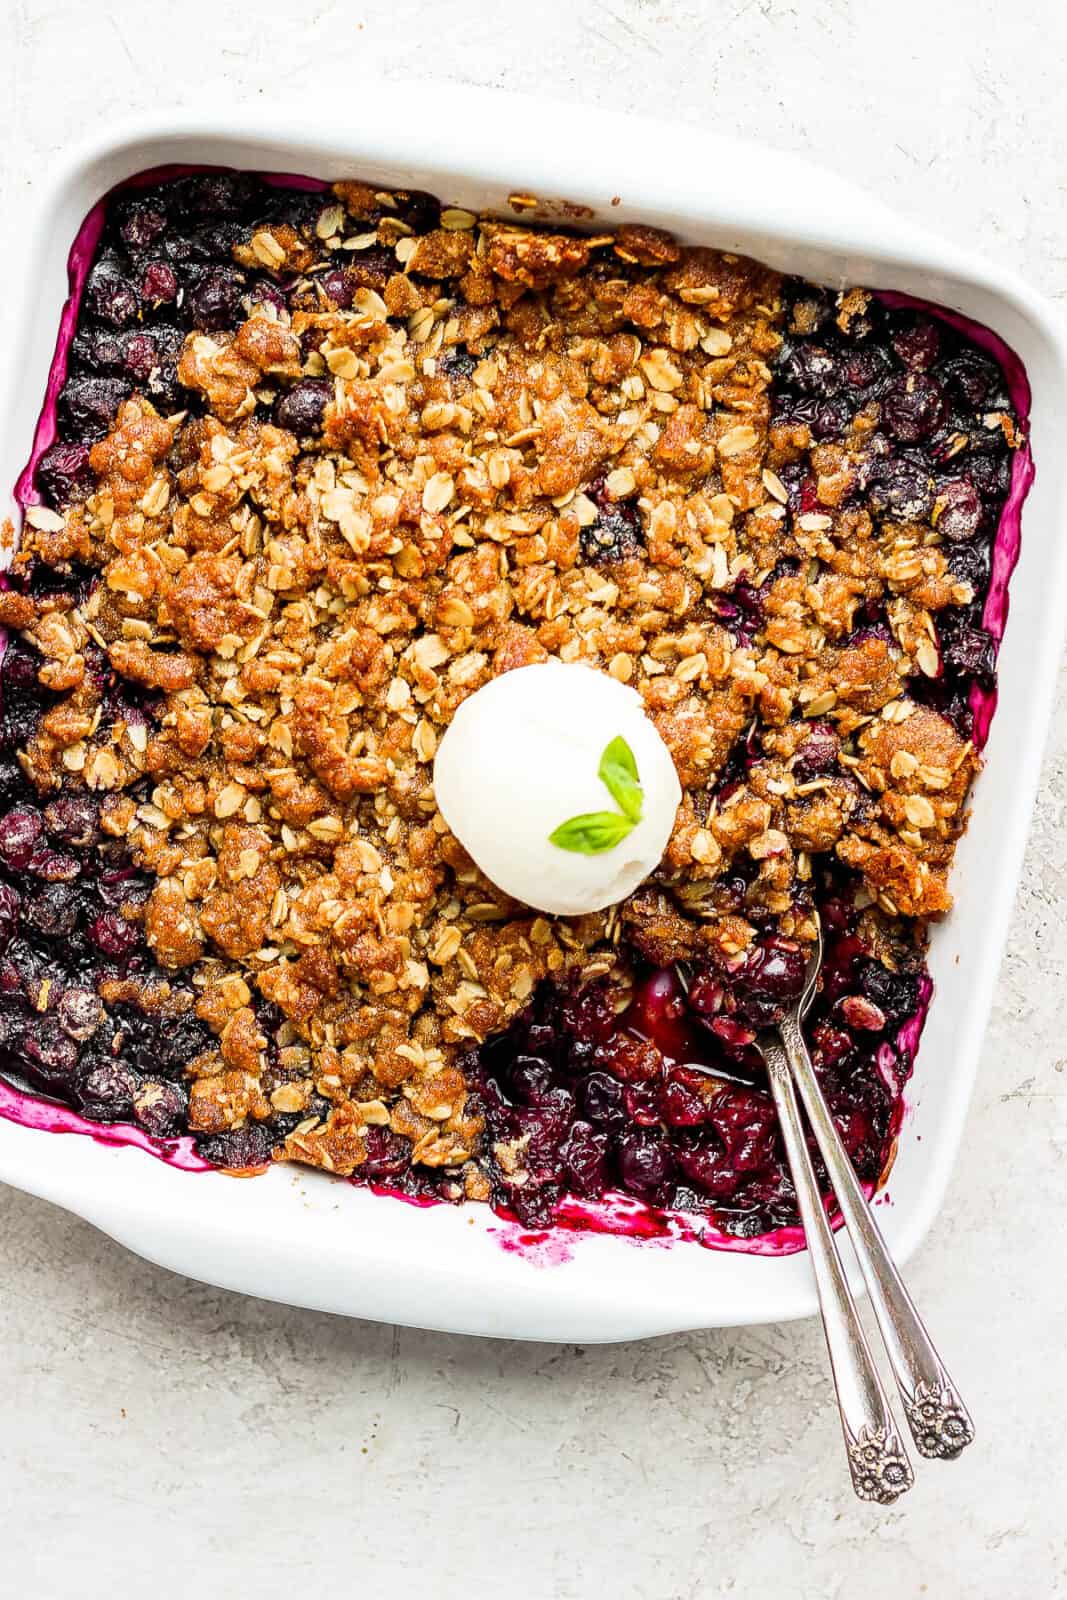 A quick and easy blueberry crisp with a scoop of vanilla ice cream on top.